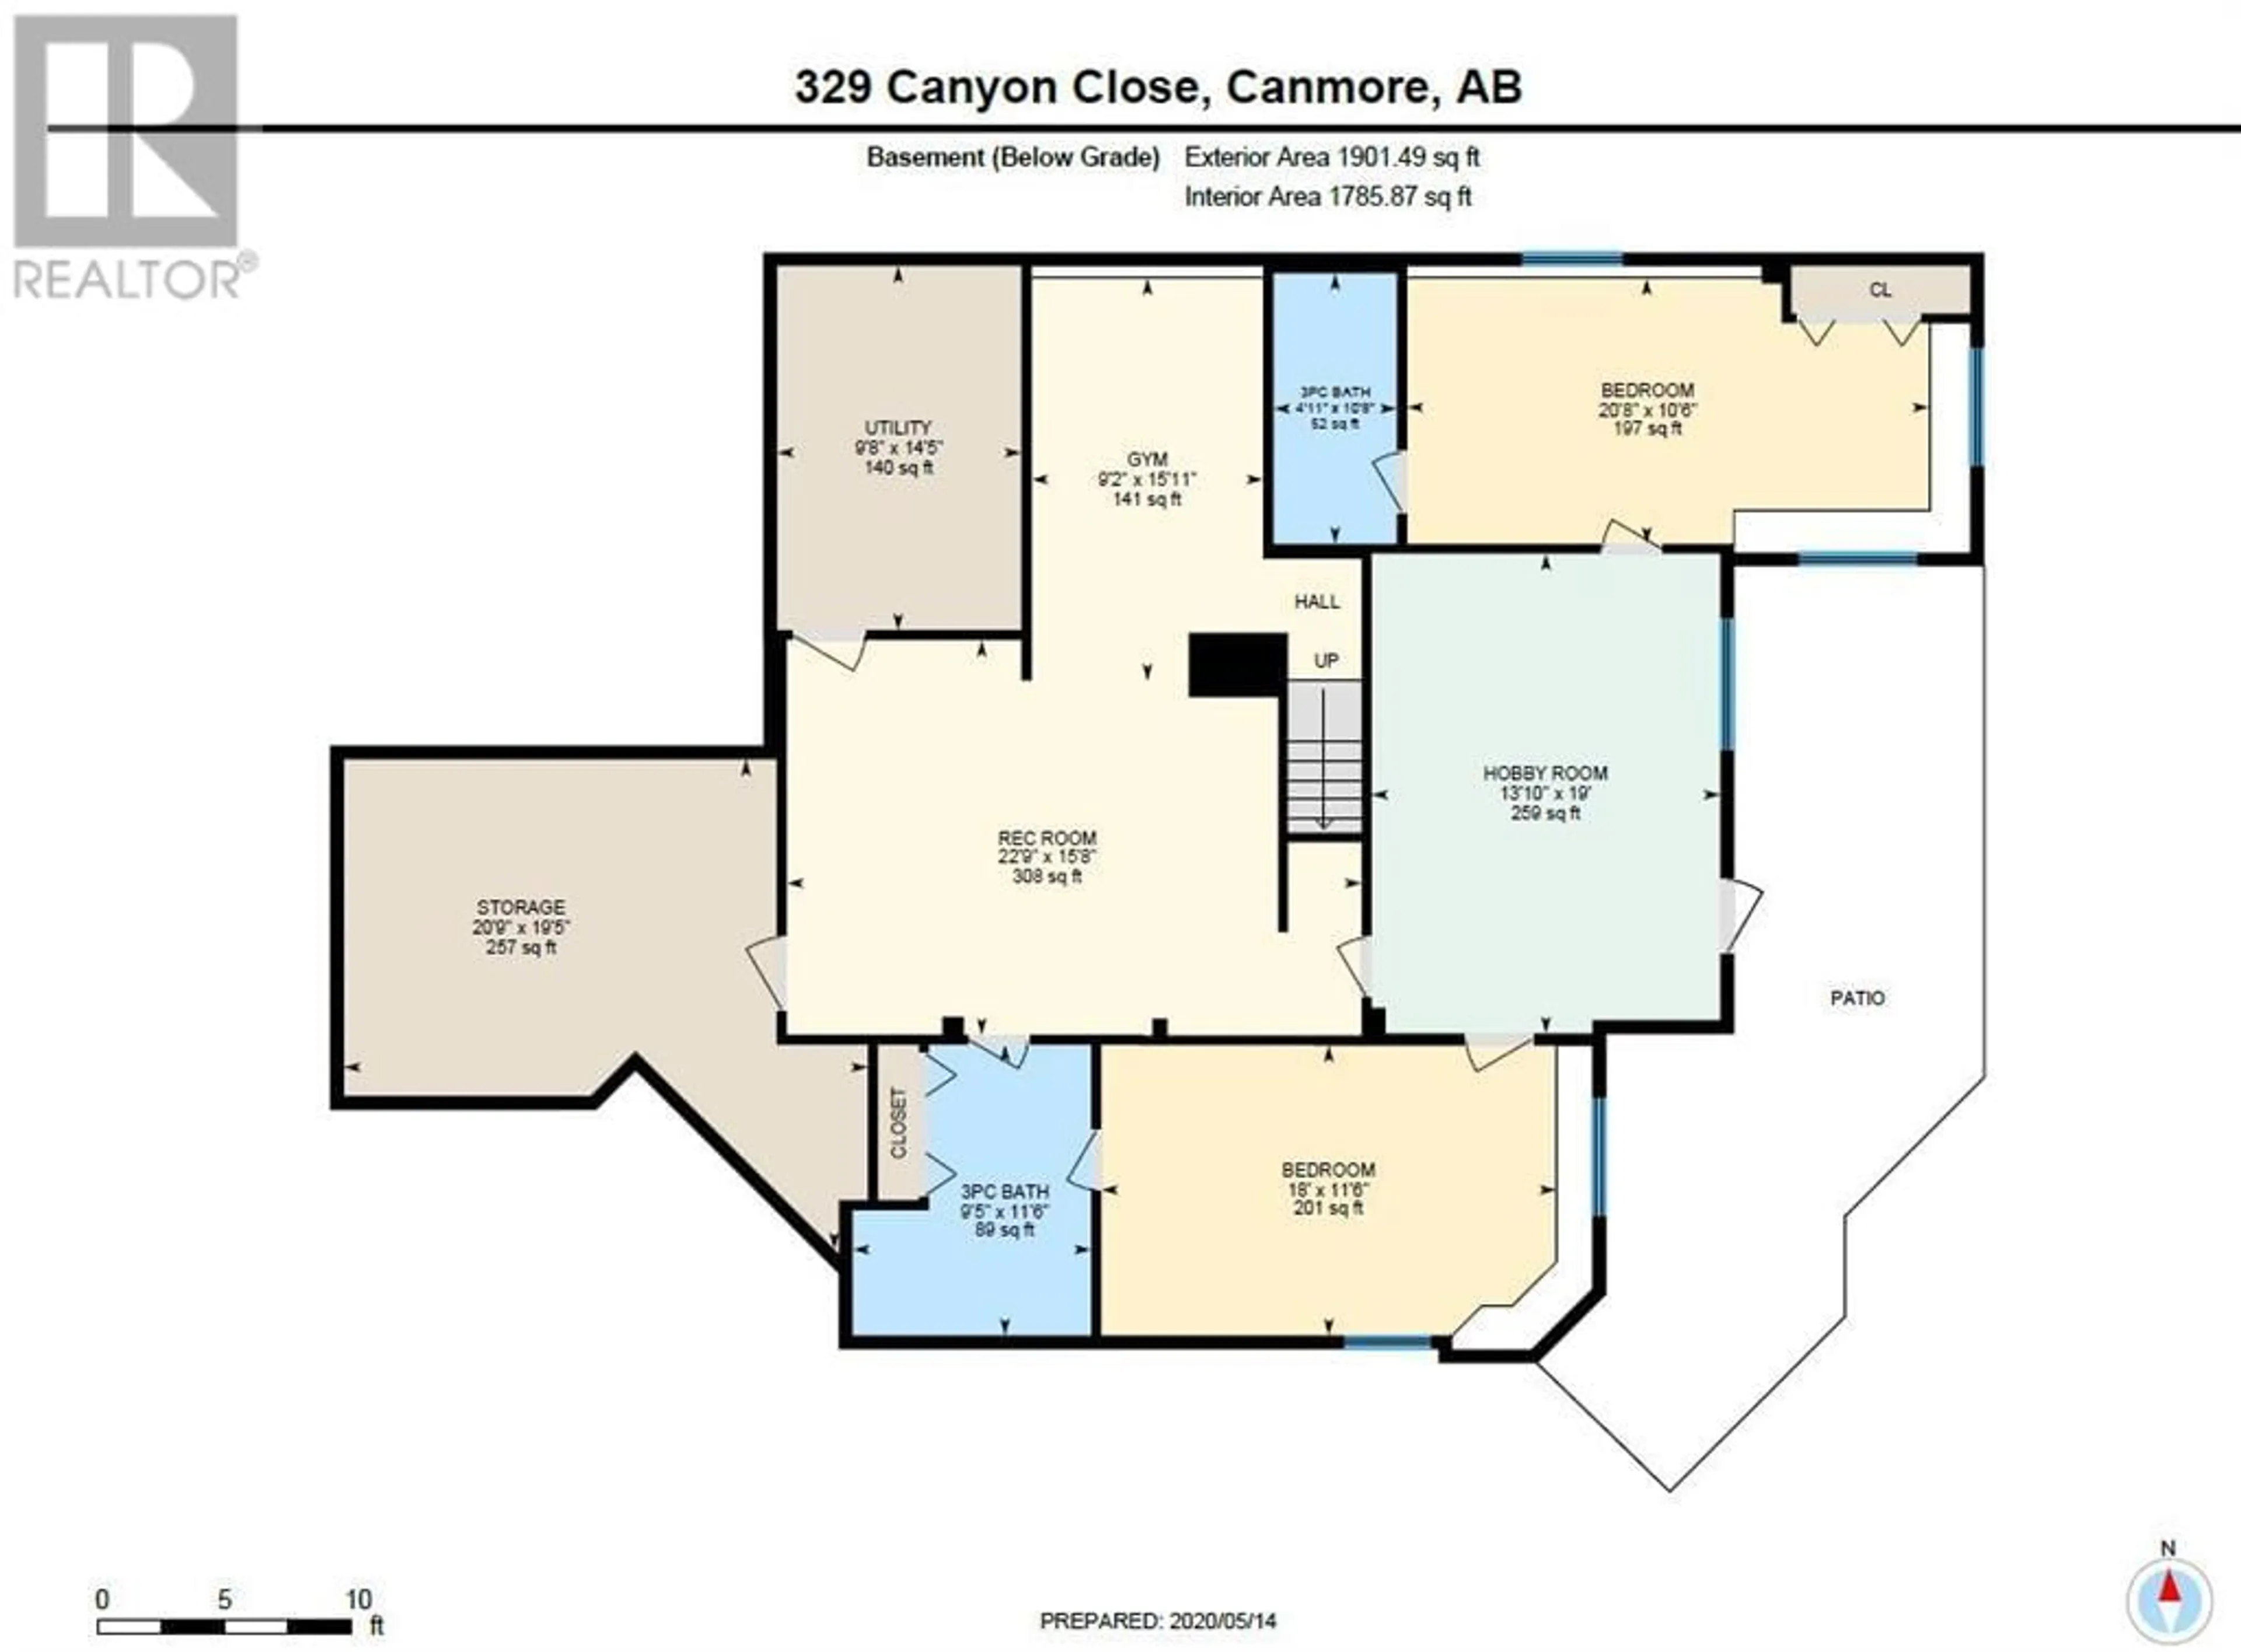 Floor plan for 329 Canyon Close, Canmore Alberta T1W1H4